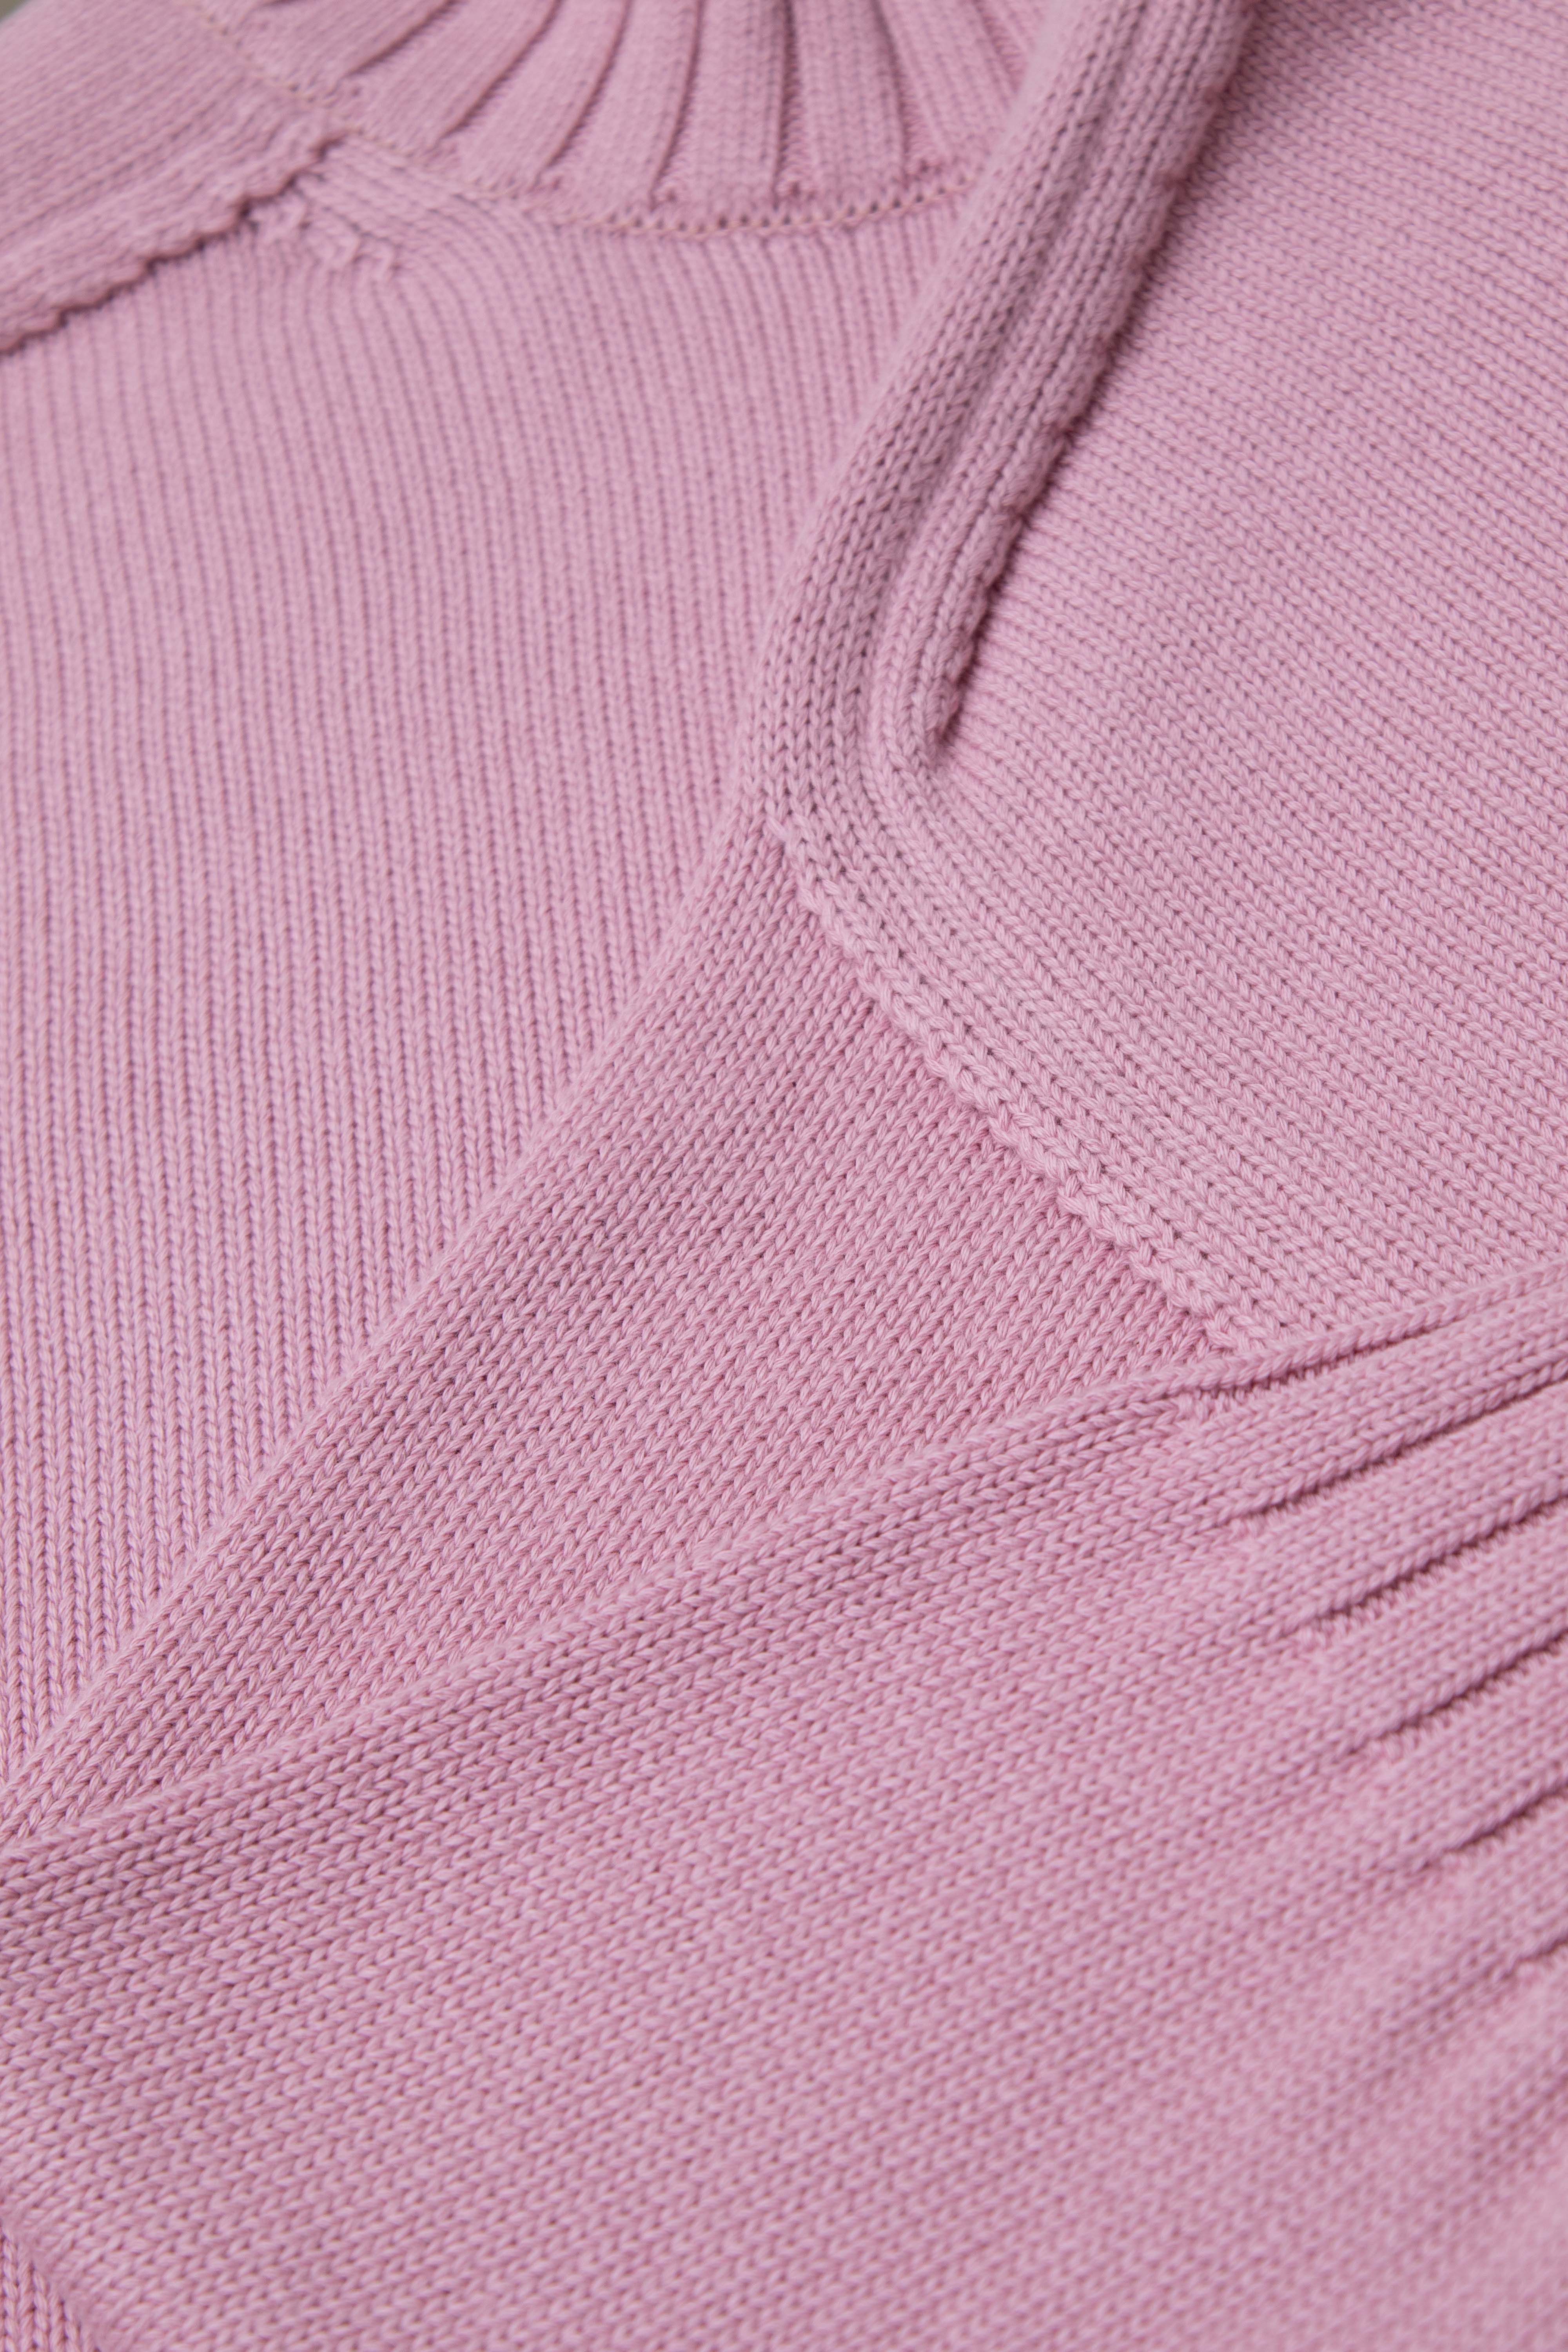 Pull-over 3597-163 Dusty pink from BRUSNiKA